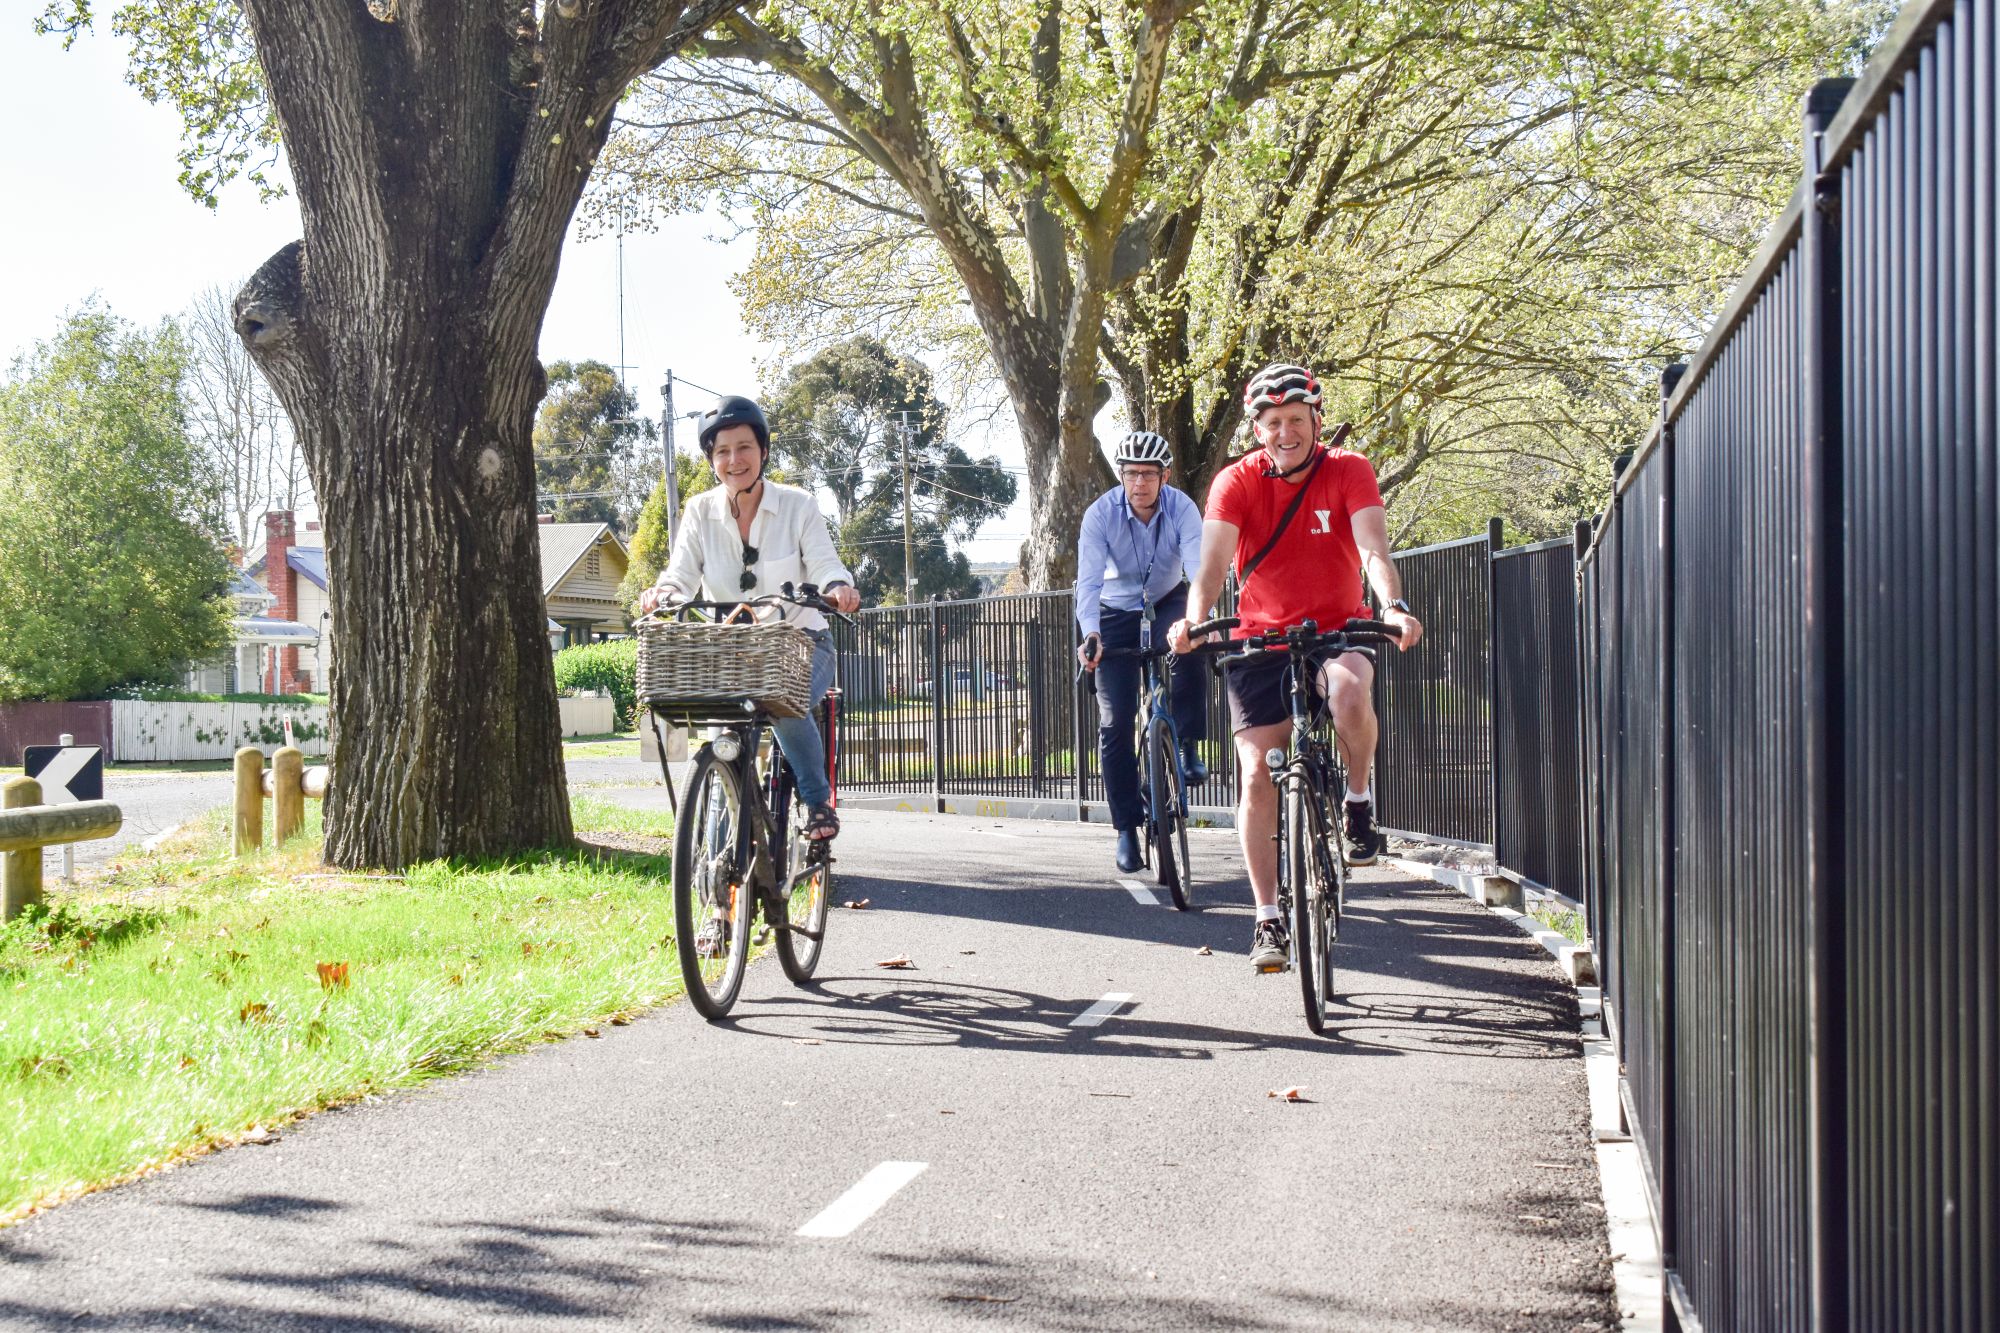 Generic image of Cr Coates, Evan King and Wallace Martin riding bikes on shared path